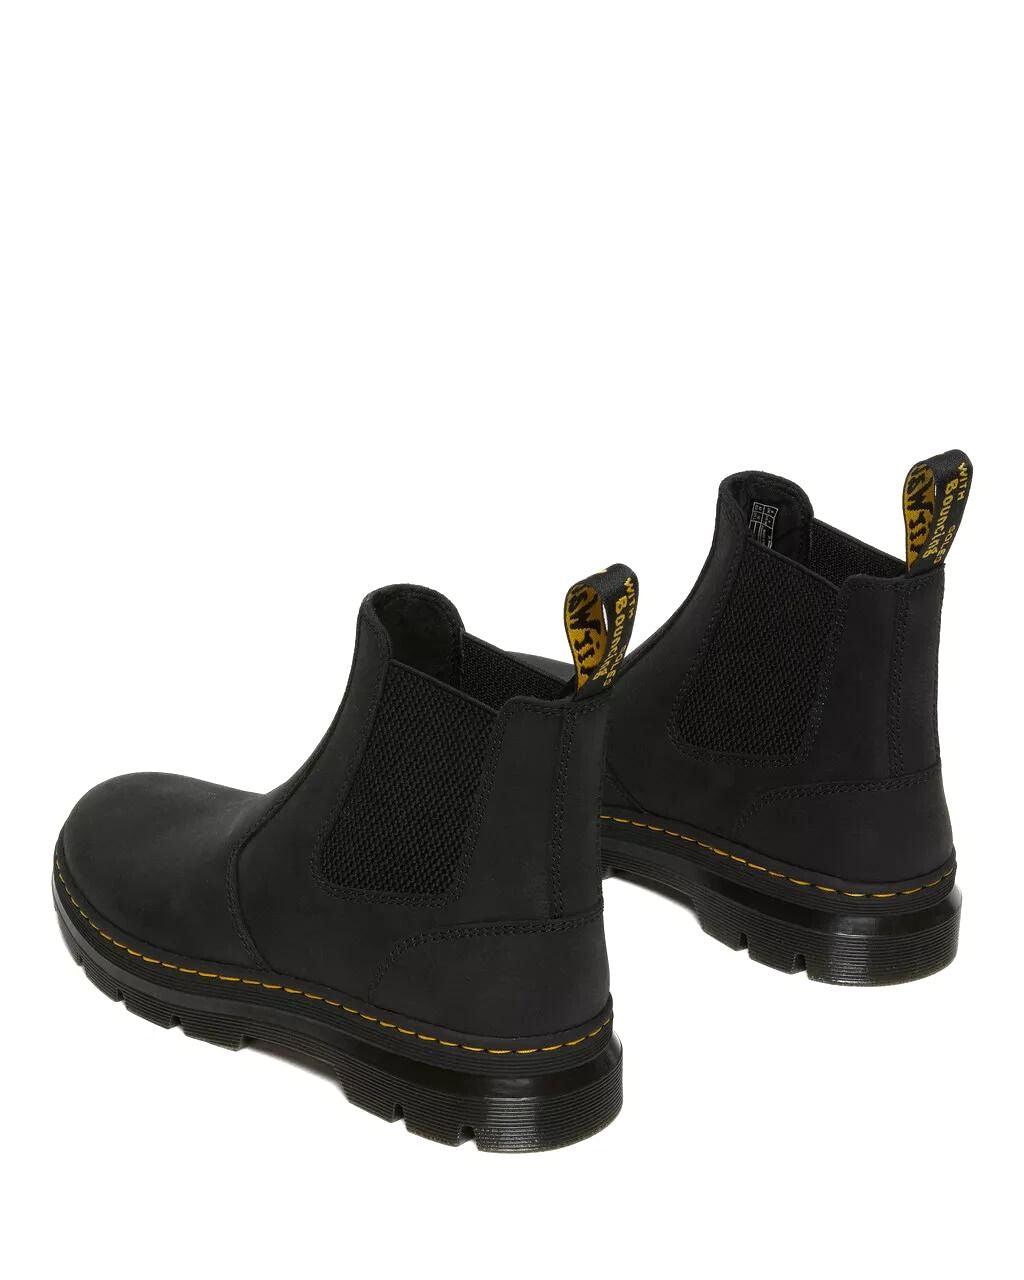 Dr Martens Embury Leather Chelsea Boot Wyoming Black